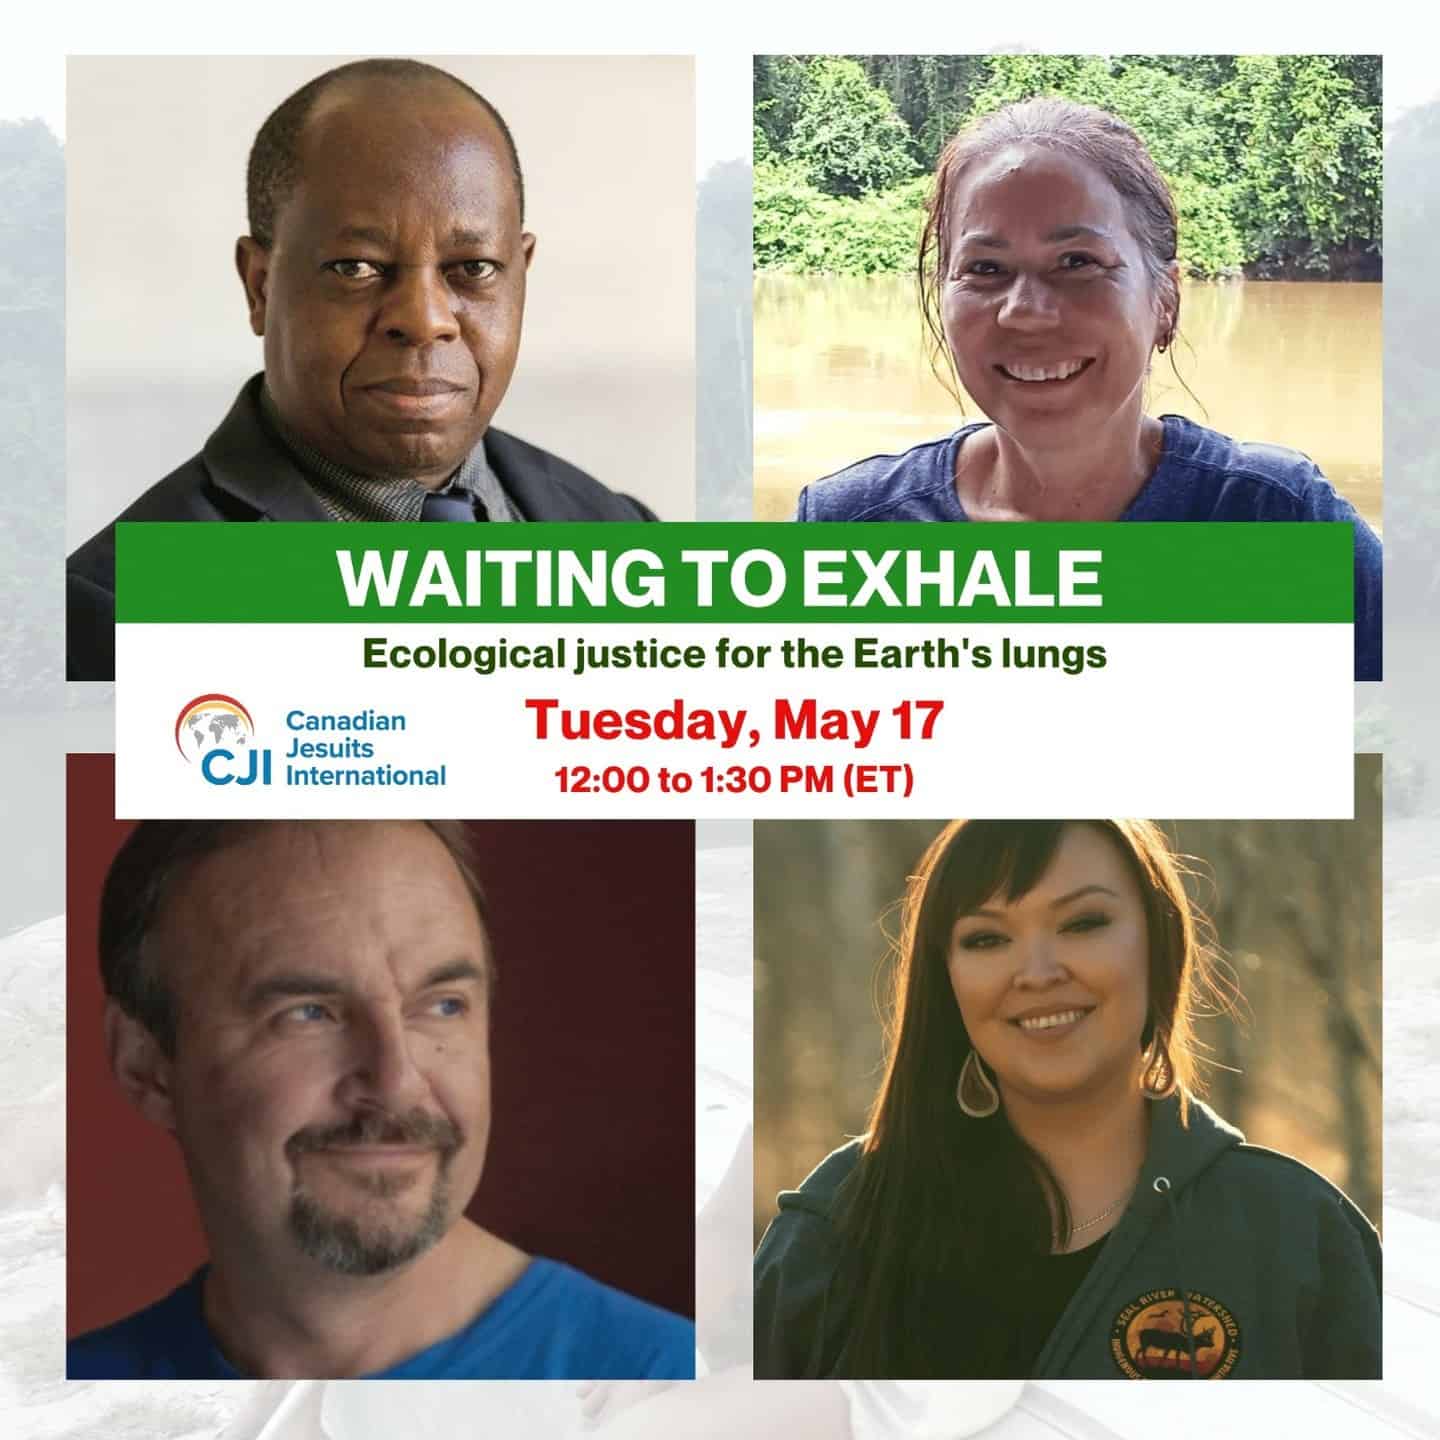 Join us for a discussion on climate change and the challenges faced by the people who call the Amazon, the Congo Basin and the Boreal forest home.Tue, May 17, 2022
12:00 PM – 1:30 PM EDTThe Amazon, the Congo Basin, and the Boreal Forest are often described as the planet’s lungs -- these regions absorb enormous amounts of carbon dioxide in the atmosphere and breathe out oxygen. Their protection is crucial in mitigating climate change.Canadian Jesuits International is pleased to invite Rigobert Minani SJ (Ecclesial Network of the Congo Basin Forest), Laura Vicuña Pereira Manso, CF (Ecclesial Conference of the Amazon Region), Ron Thiessen (Canadian Parks & Wilderness Society – Manitoba chapter) and Stephanie Thorassie (Seal River Watershed Alliance) to speak about the challenges that these regions and their people face.https://bitly.com/EarthsLungs
#amazon #socialjustice #climatejustice #indigenouspeople #borealforest #congobasin #ecologicaljustice